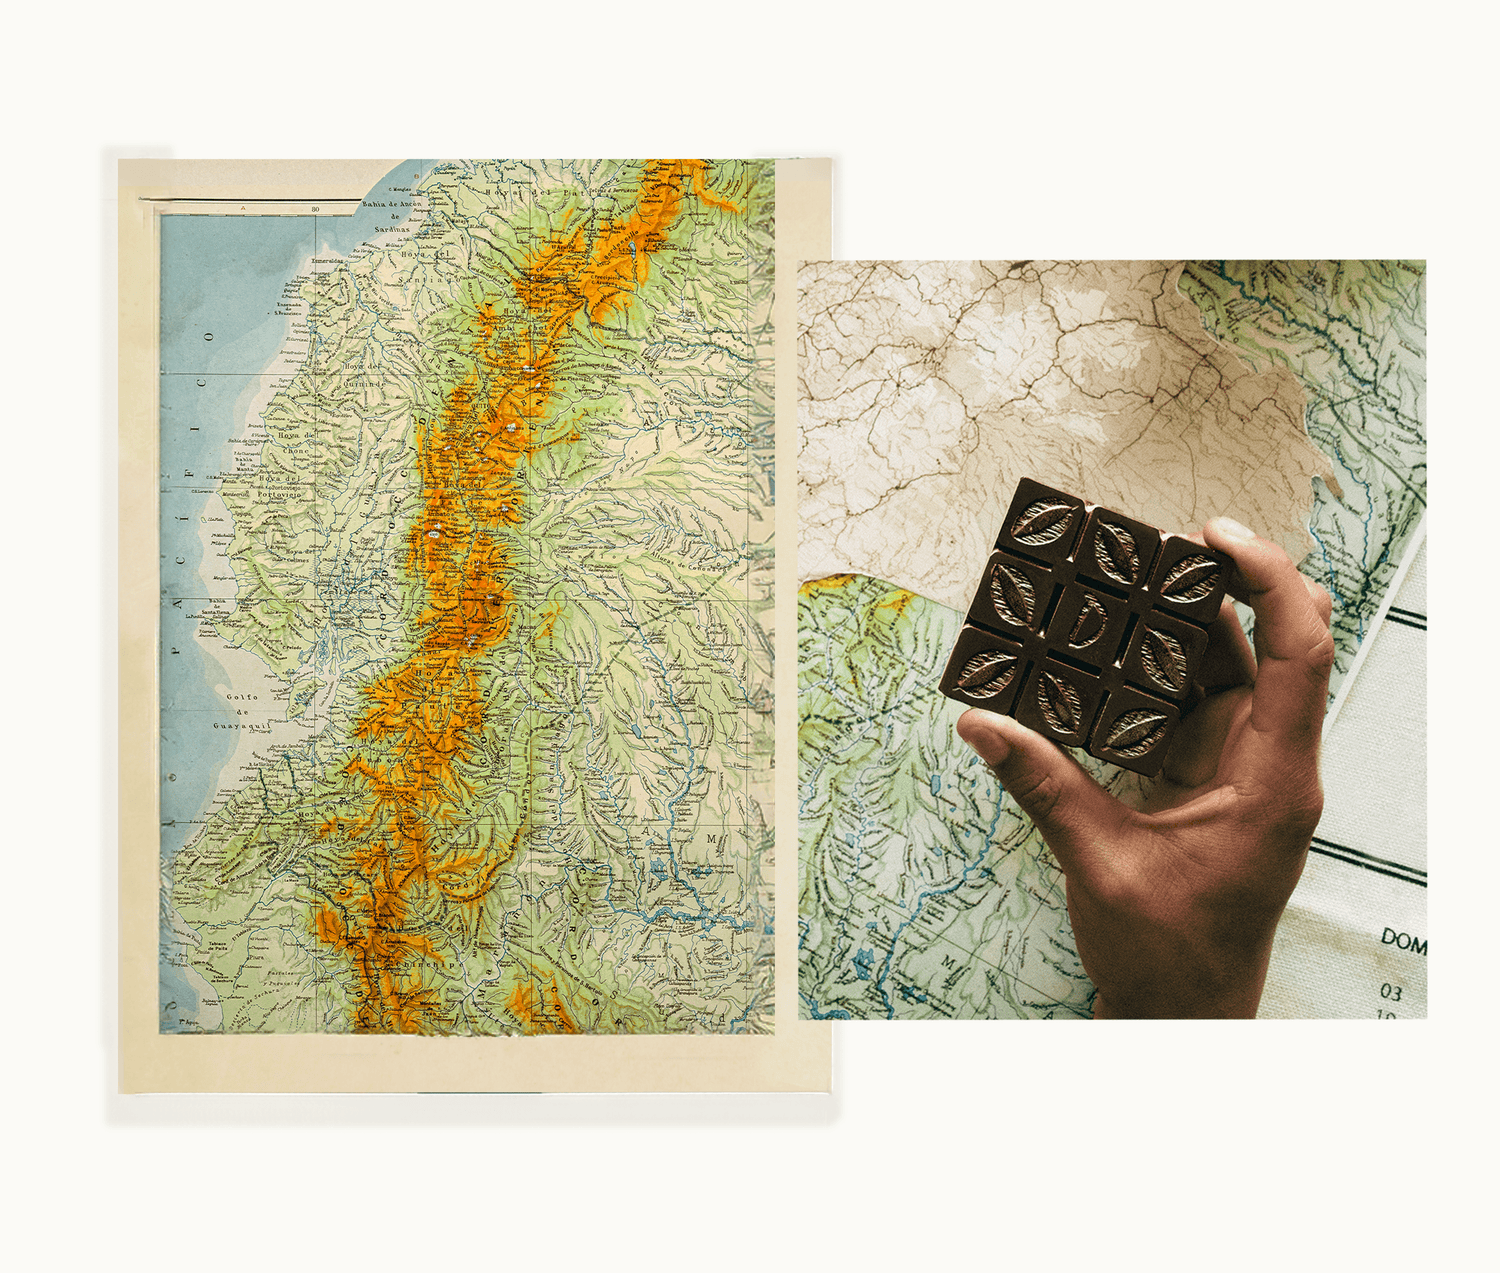 Image of a map of Ecuador from 1810s displaying a dark chocolate in hand, with a shinning tone that demonstrate the high quality of the product.